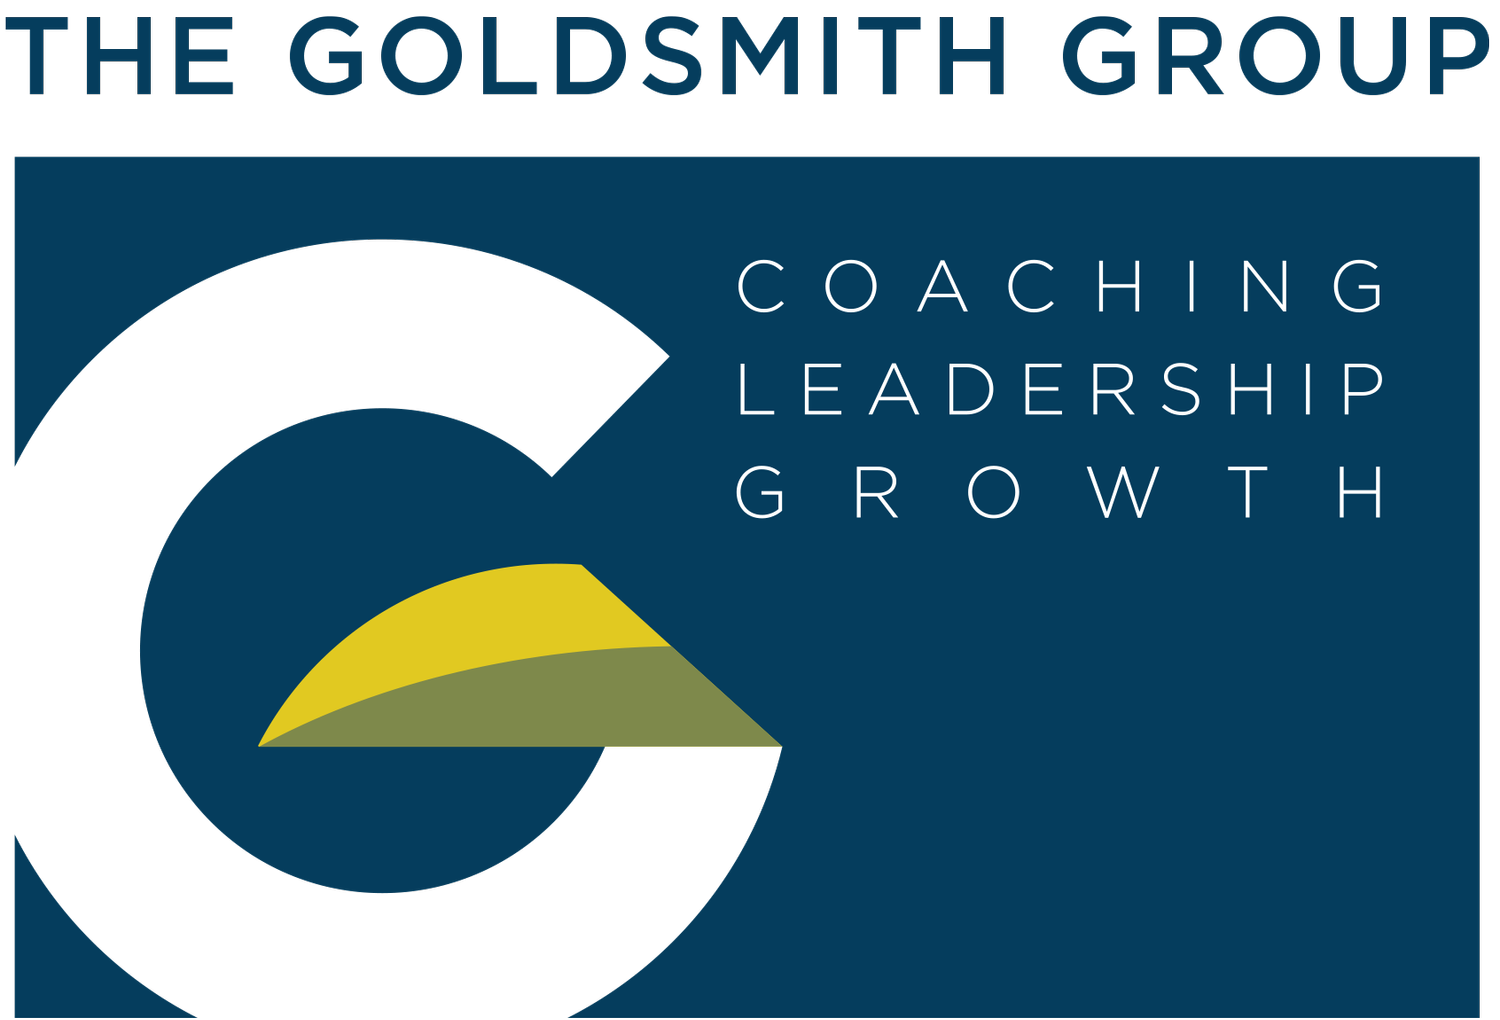 The Goldsmith Group